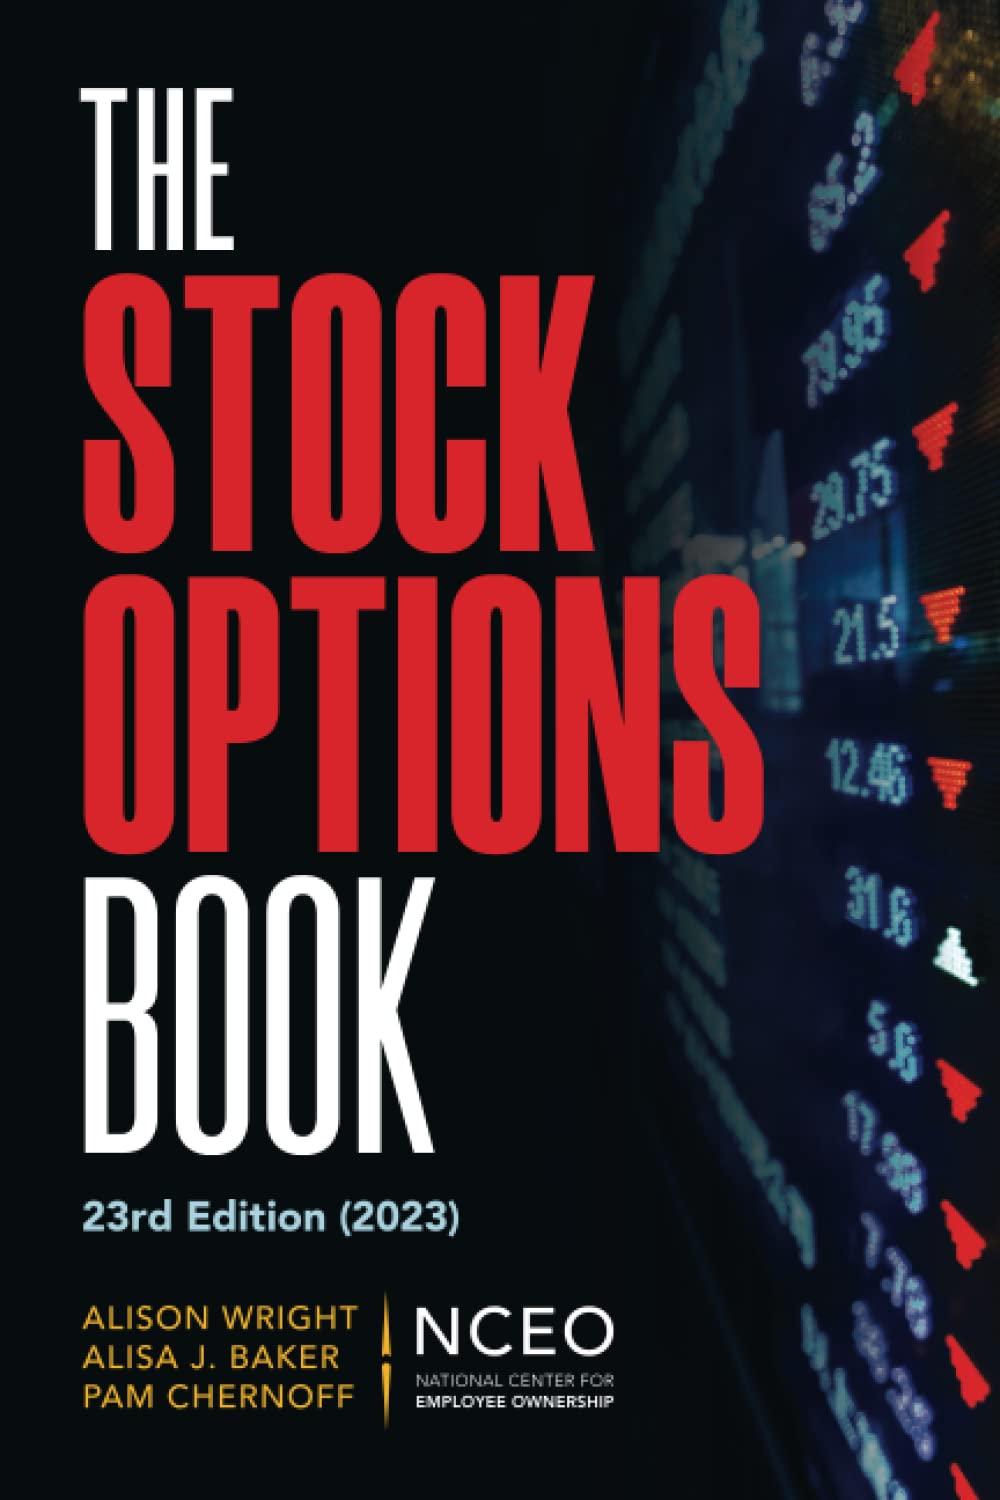 the stock options book 23rd edition alison wright, alisa j baker, pam chernoff 1954990200, 978-1954990203